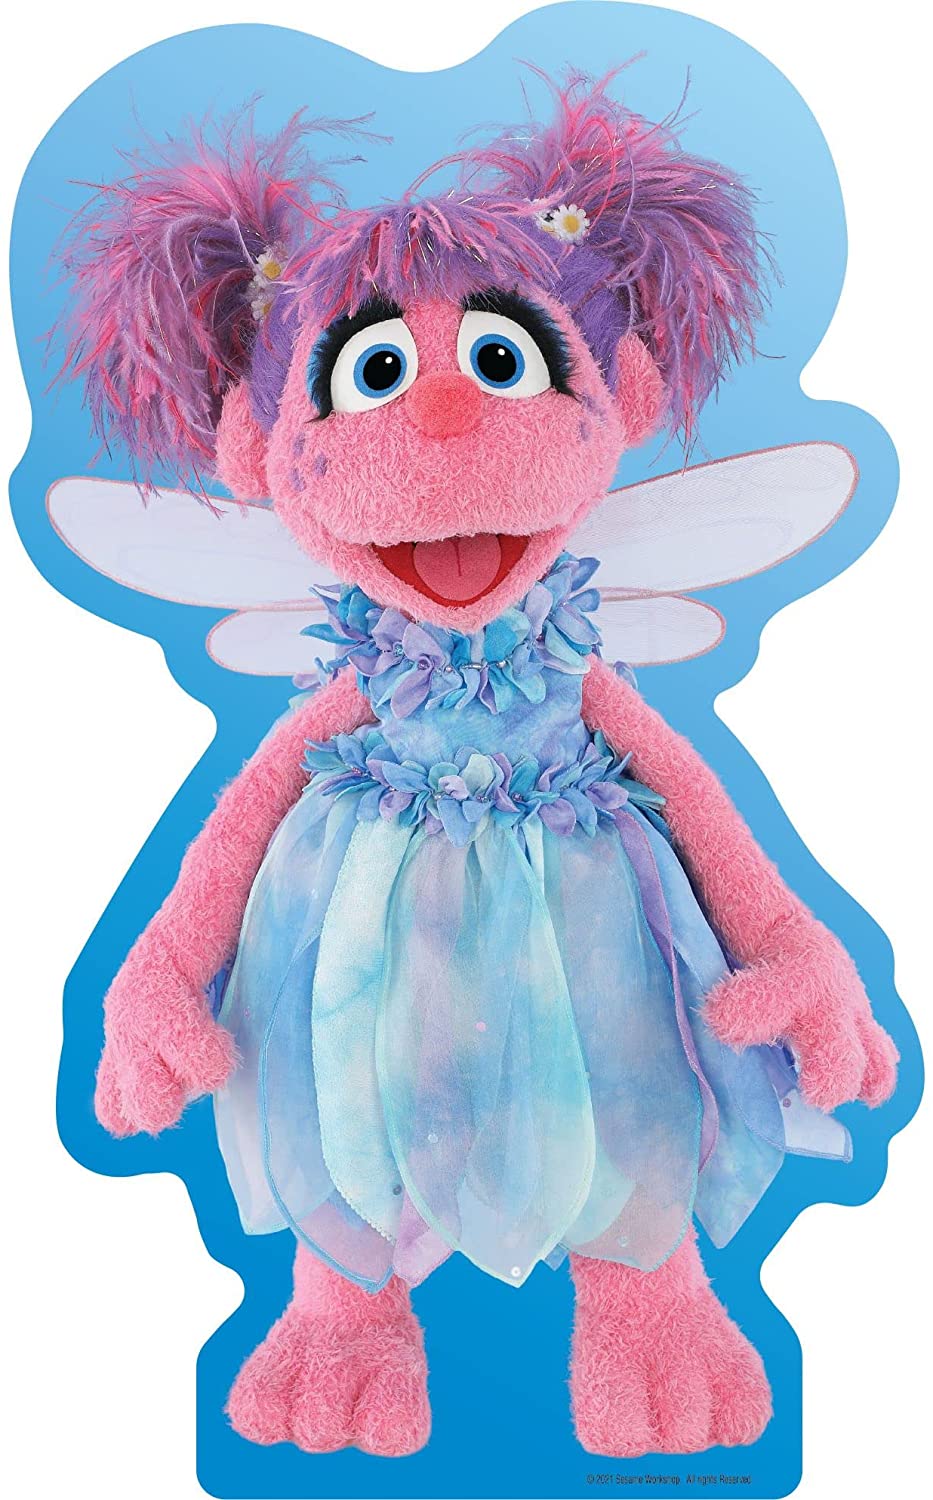 Party City Sesame Street Abby Cadabby Cardboard Cutout, Themed Birthday Party Decoration and Supplies, 4' H, 1 Count, Toys & Games